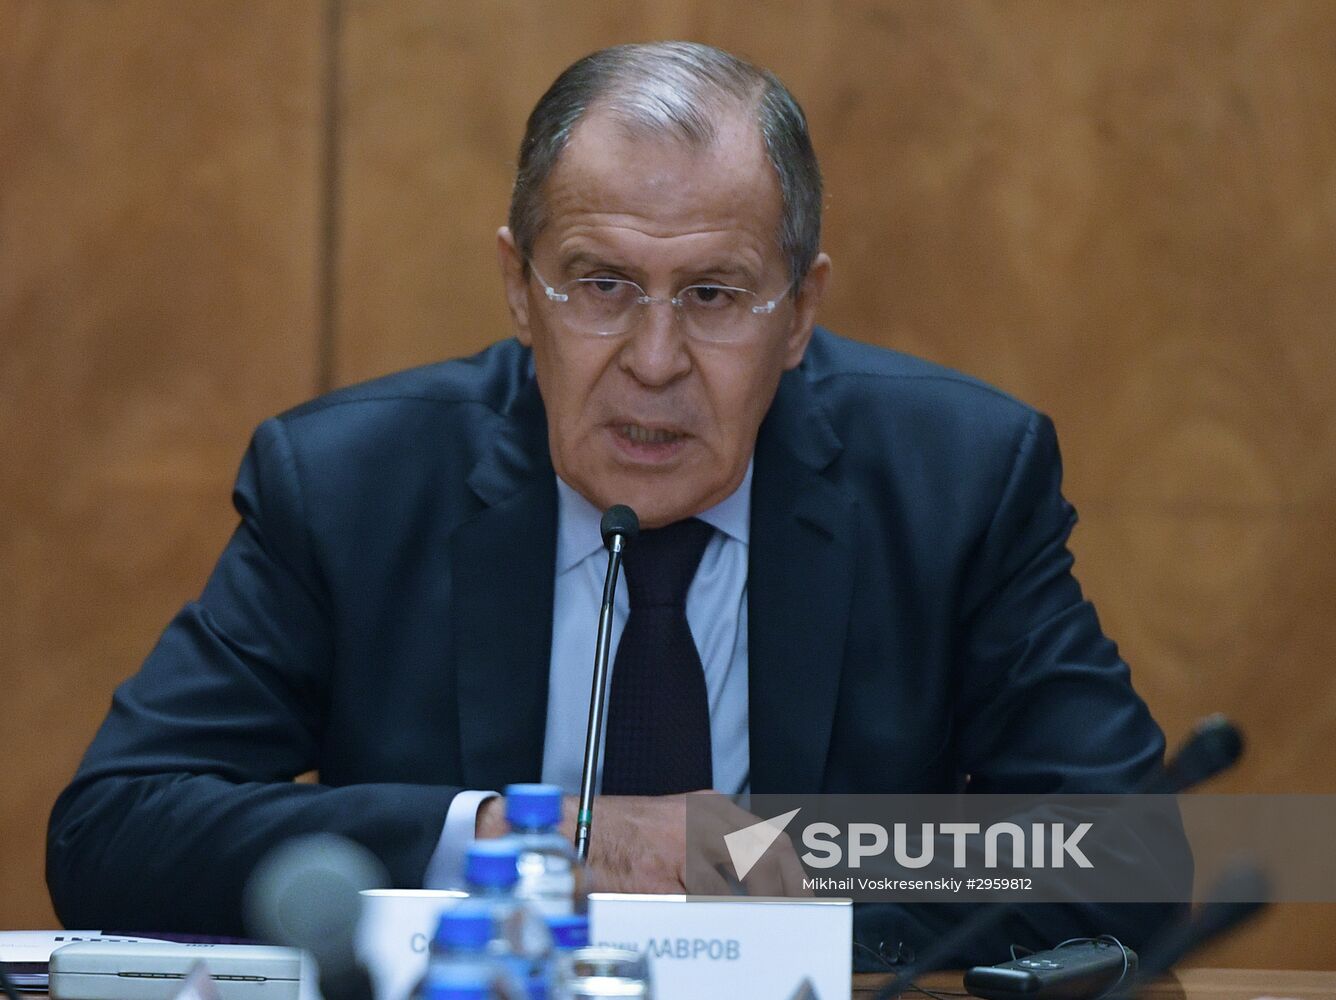 Russian Foreign Minister Sergei Lavrov meets the participants of International Conference "Middle East: Trends and Prospects"